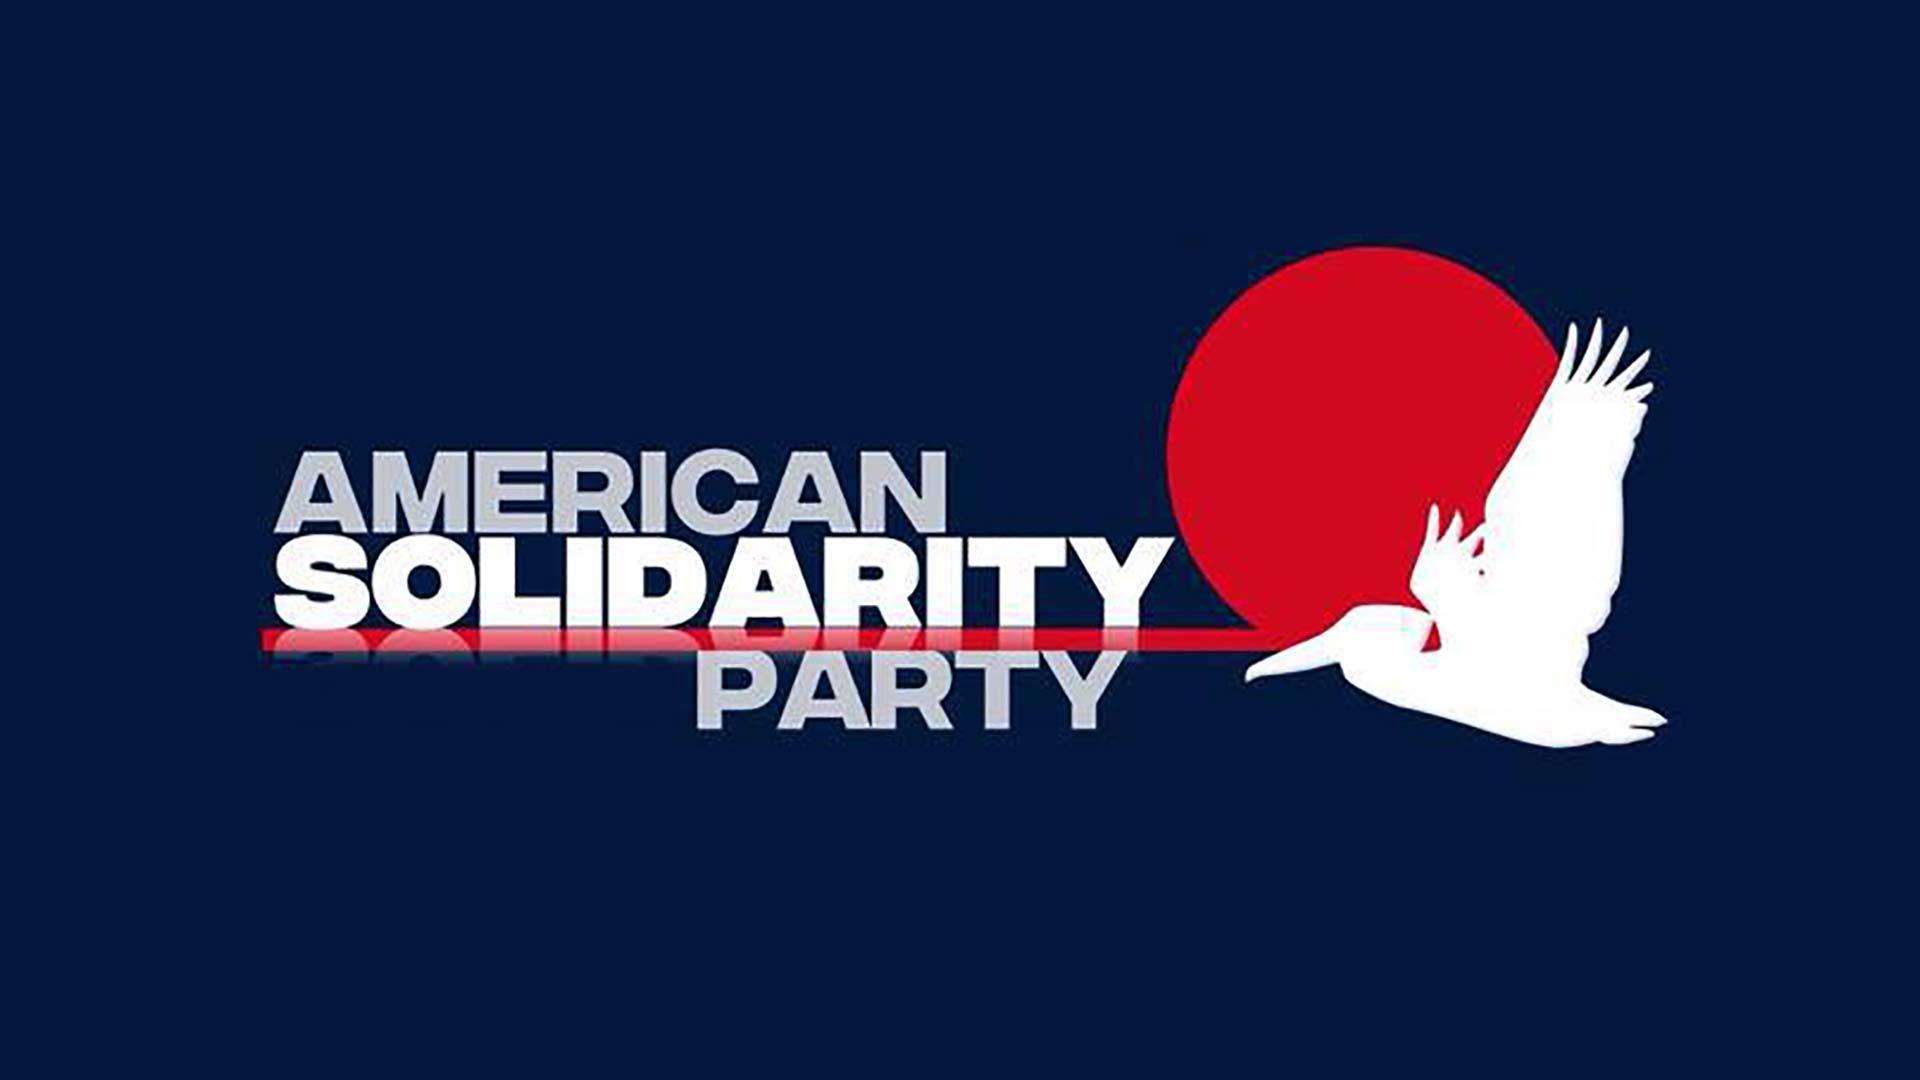 Gloria Purvis to speak at American Solidarity Party national convention June 25th-27th